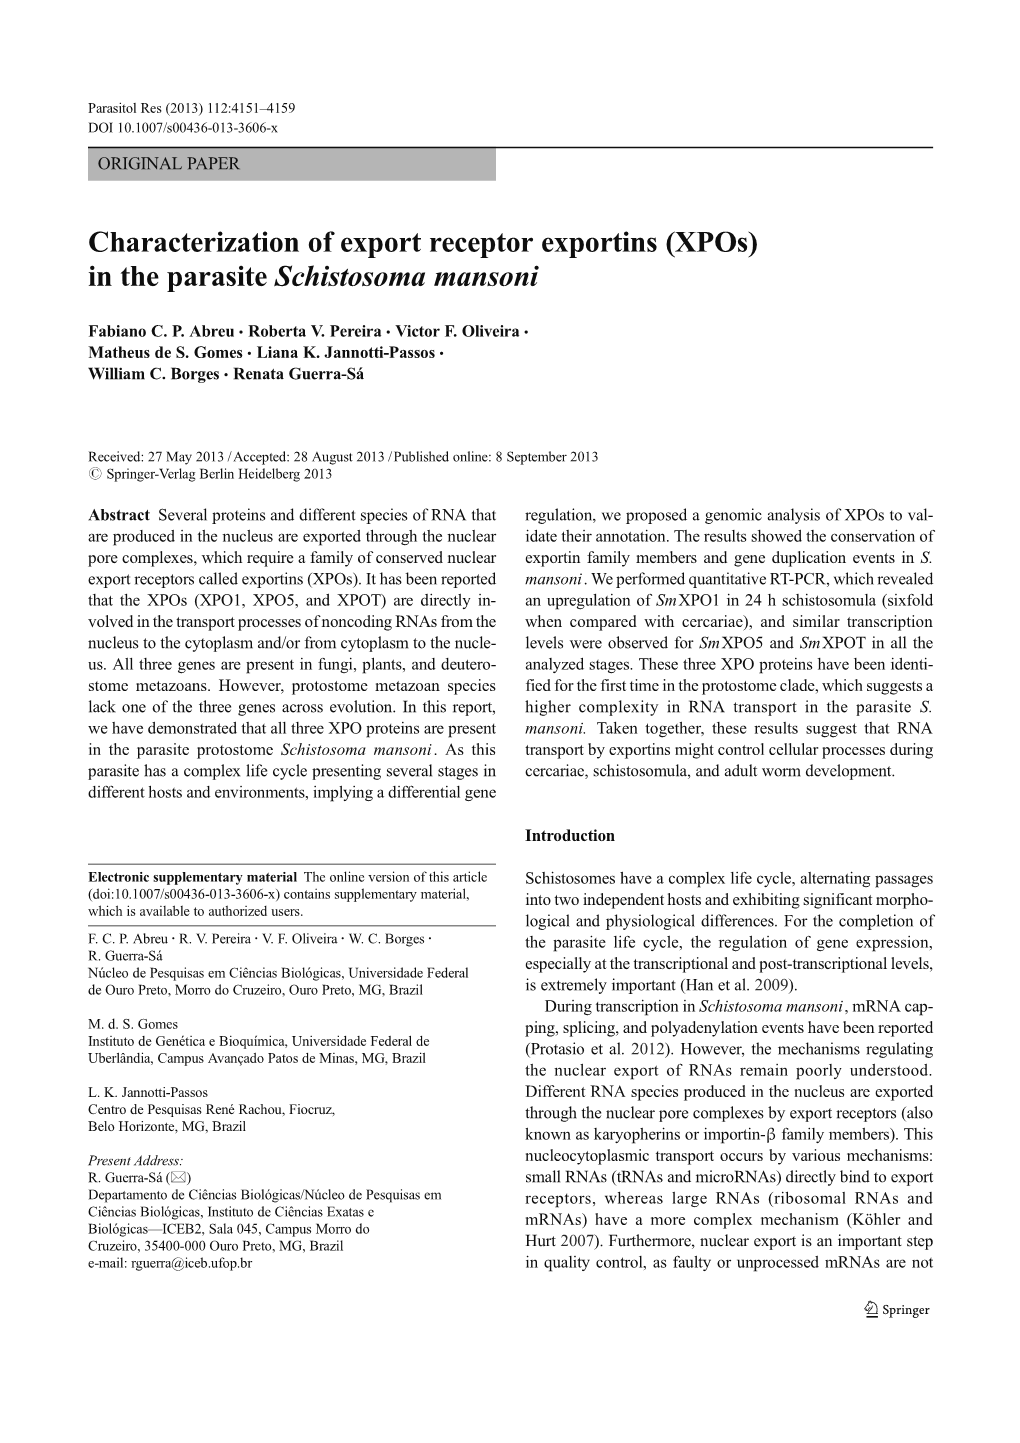 Characterization of Export Receptor Exportins (Xpos) in the Parasite Schistosoma Mansoni